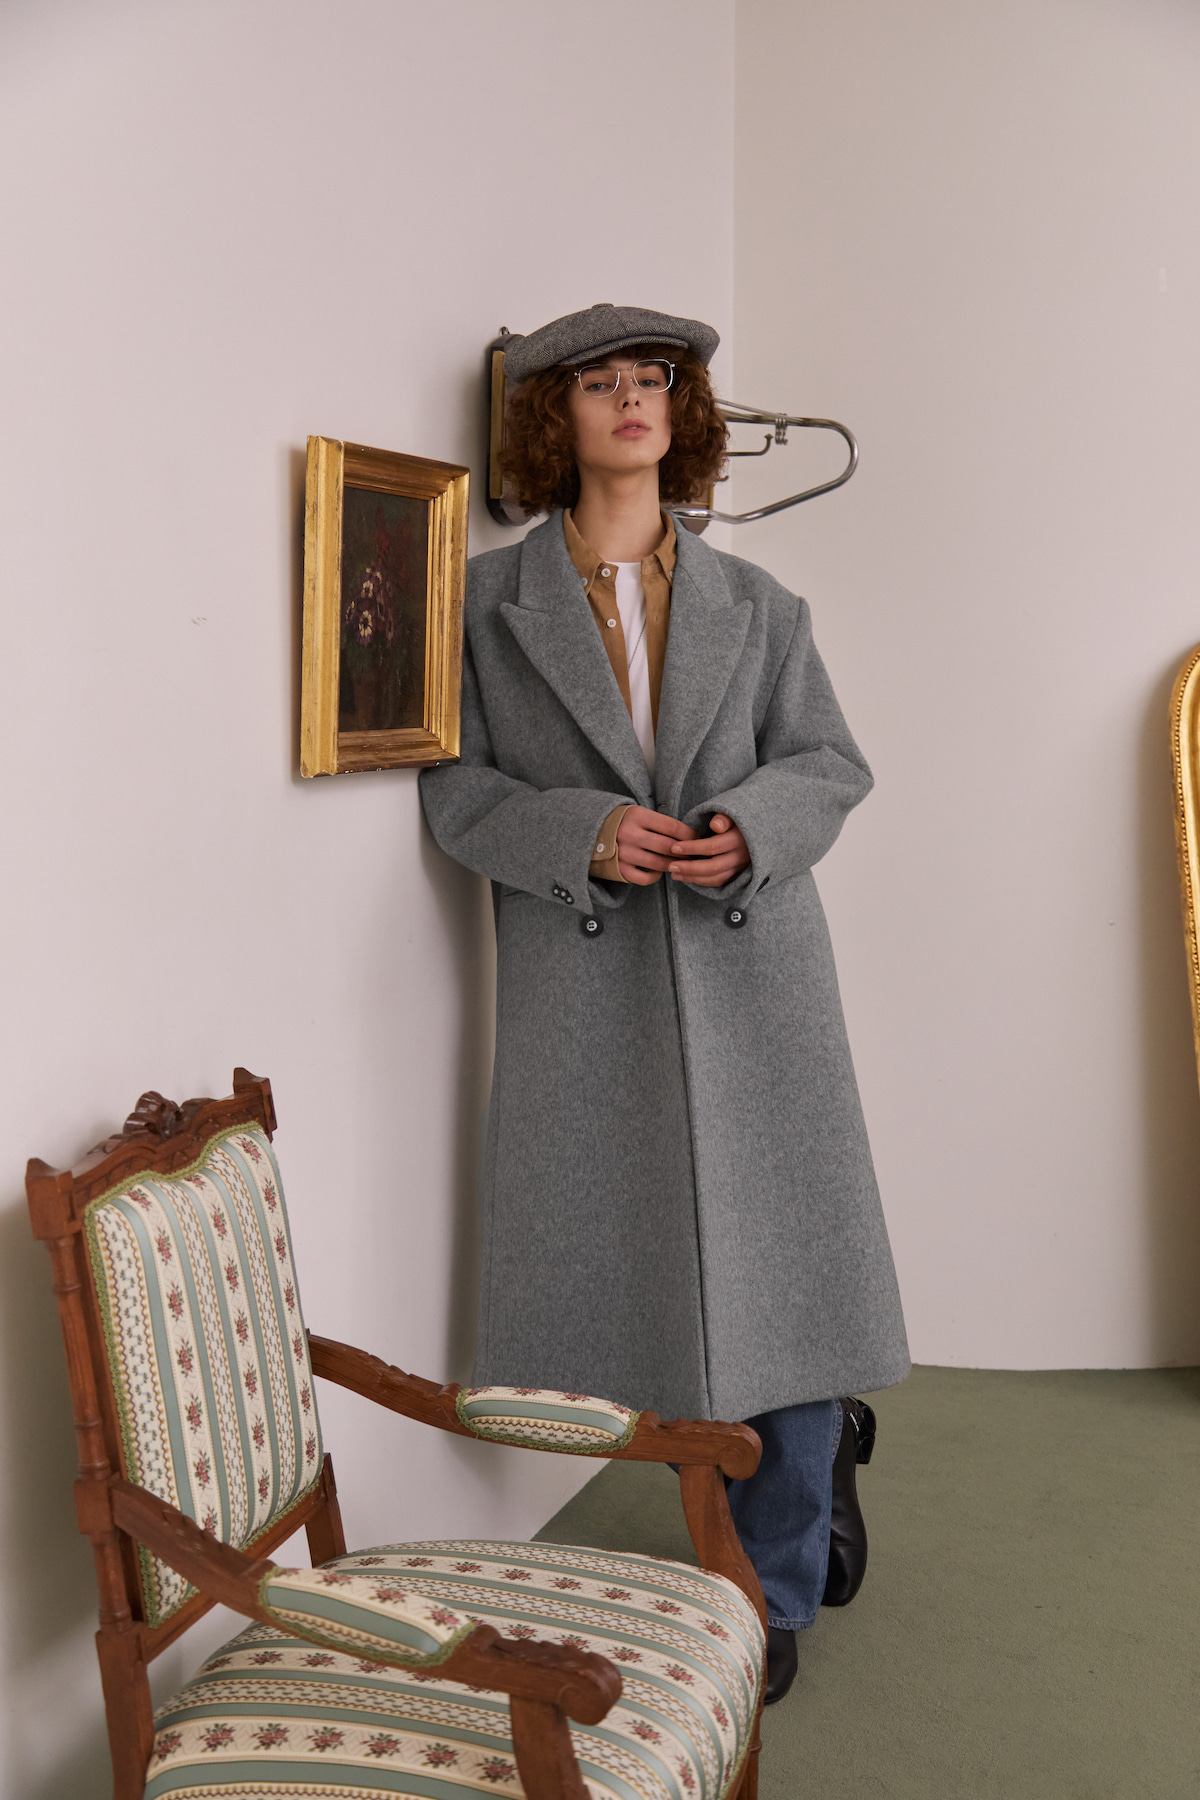 Overfit Double - Breasted Cashmere Coat Grey (12월 9일 순차 발송)